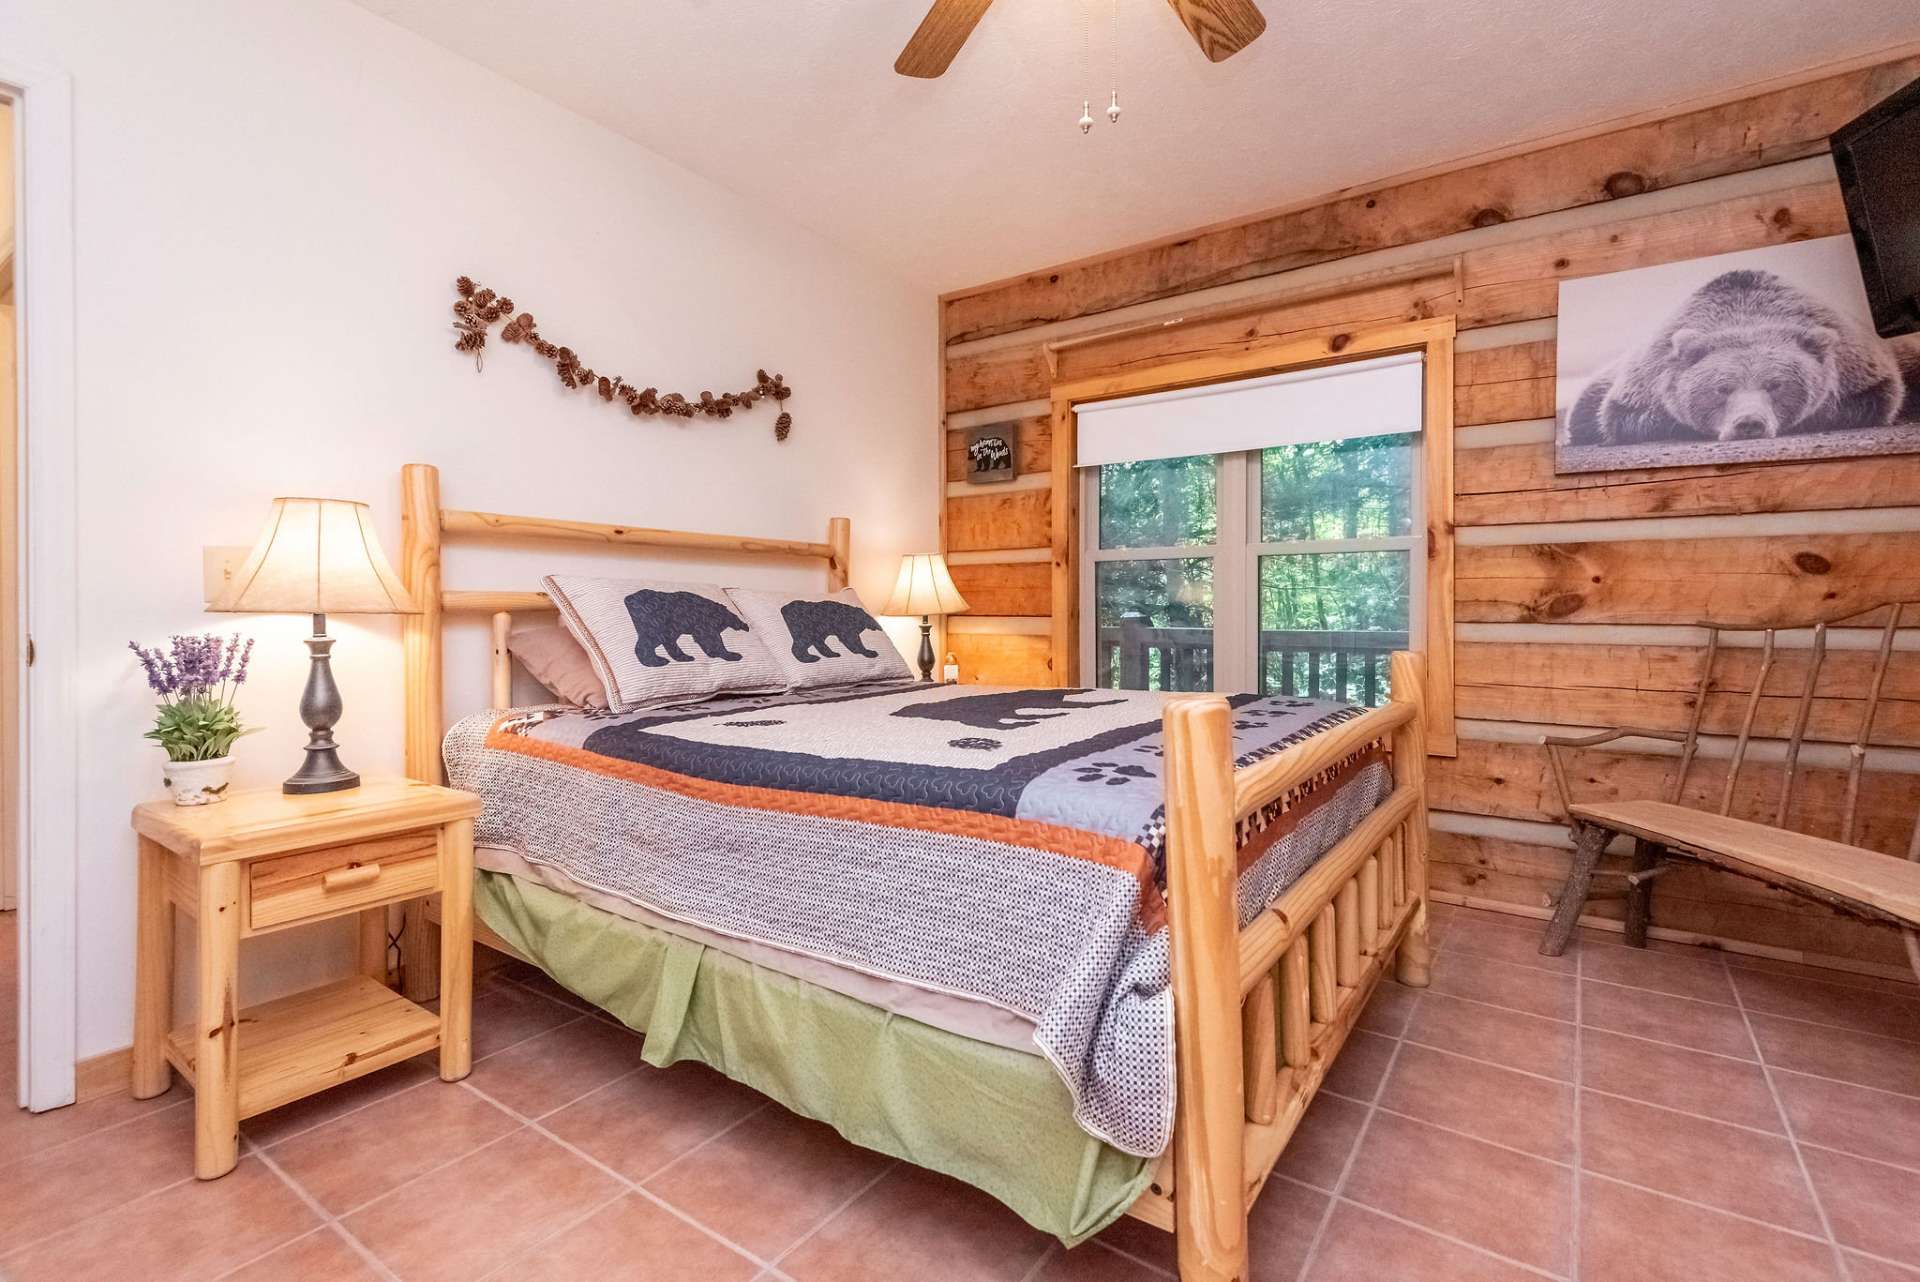 1 of 2 main level bedrooms with plenty of space to spread and out relax after a day of hiking, kayaking, exploring, or shopping.